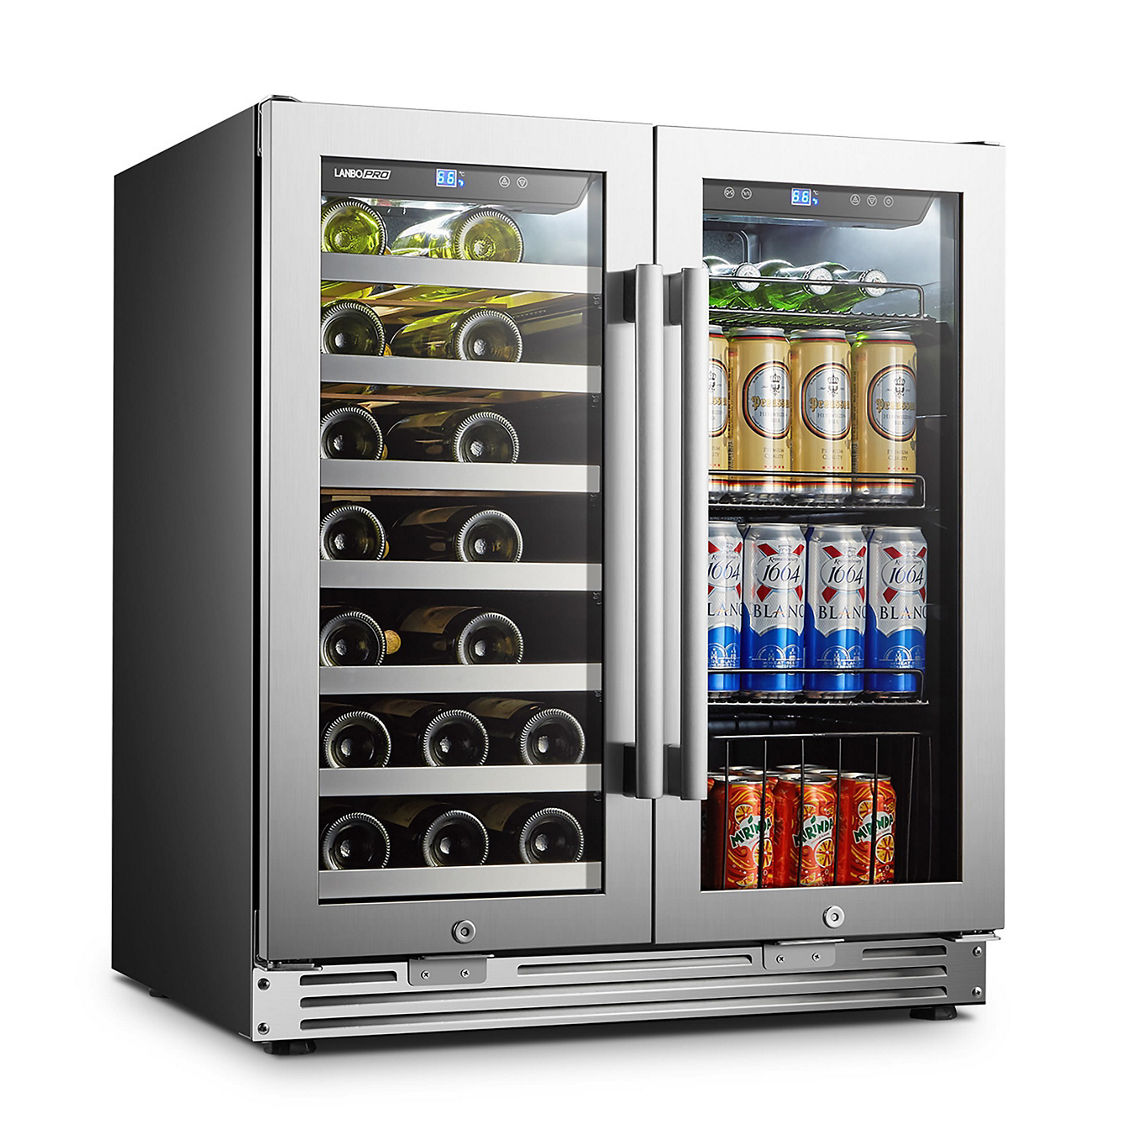 Lanbo Wine and Beverage Cooler Seemless Stainless Steel Trimmed, 26 Bottle 76 Can - Image 2 of 5